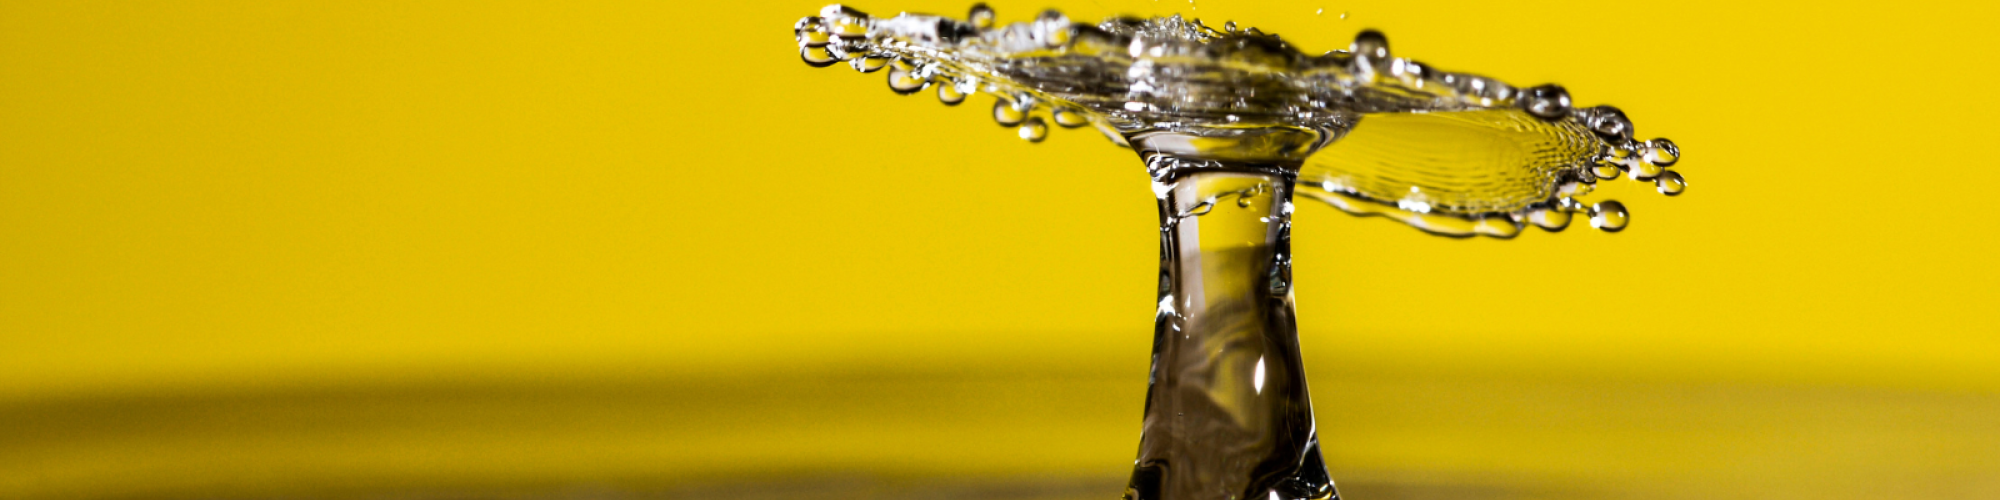 A droplet of water hits the surface in freeze frame on a yellow background.